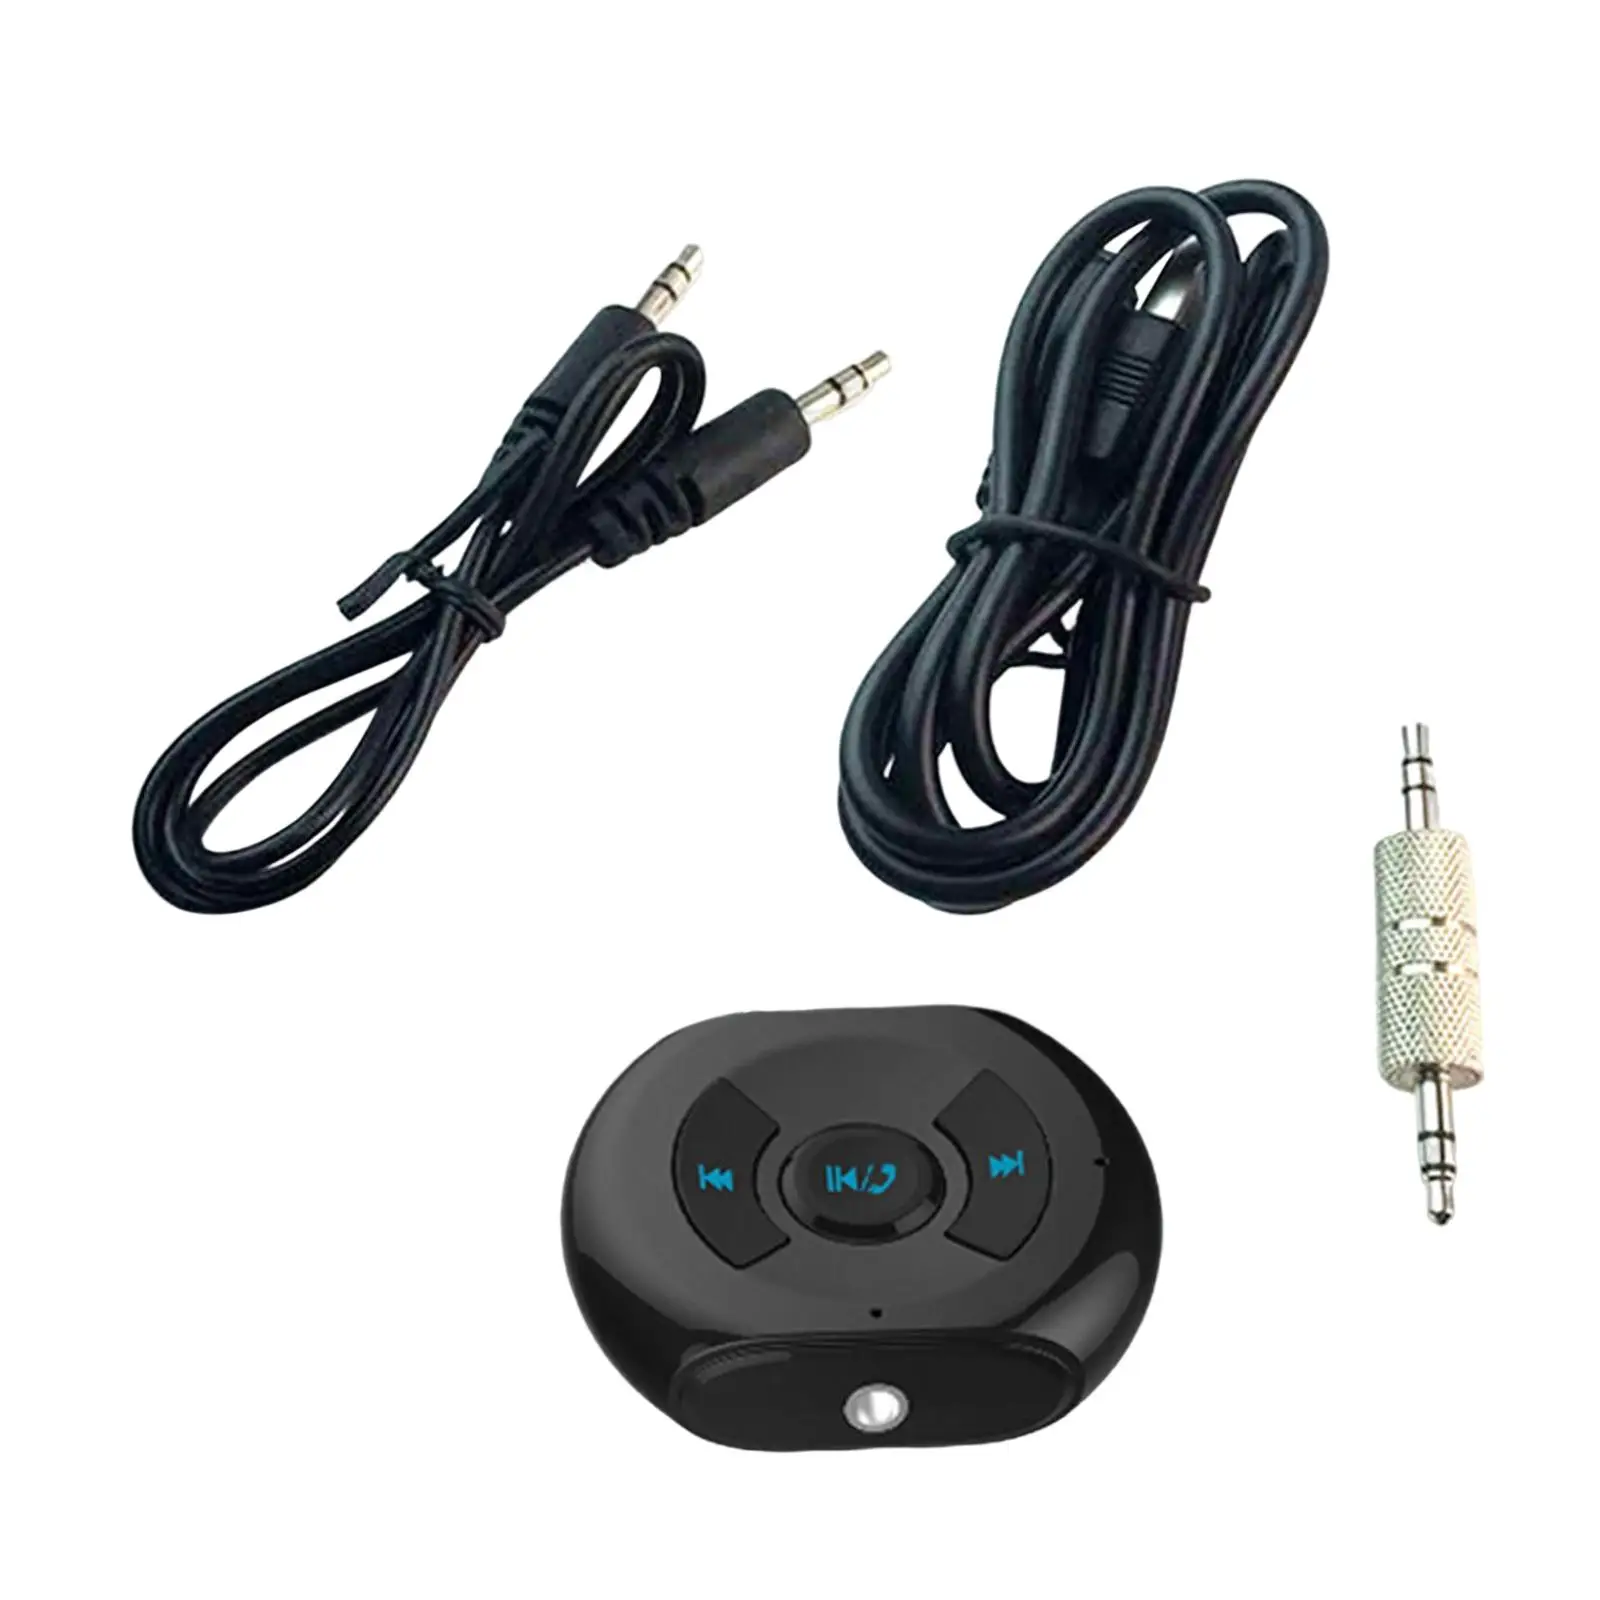 Car Bluetooth Adapter AUX 3.5mm Audio Receivers for Speaker Wired Headphones with Audio Cable Plug into 3.5mm AUX Port Portable